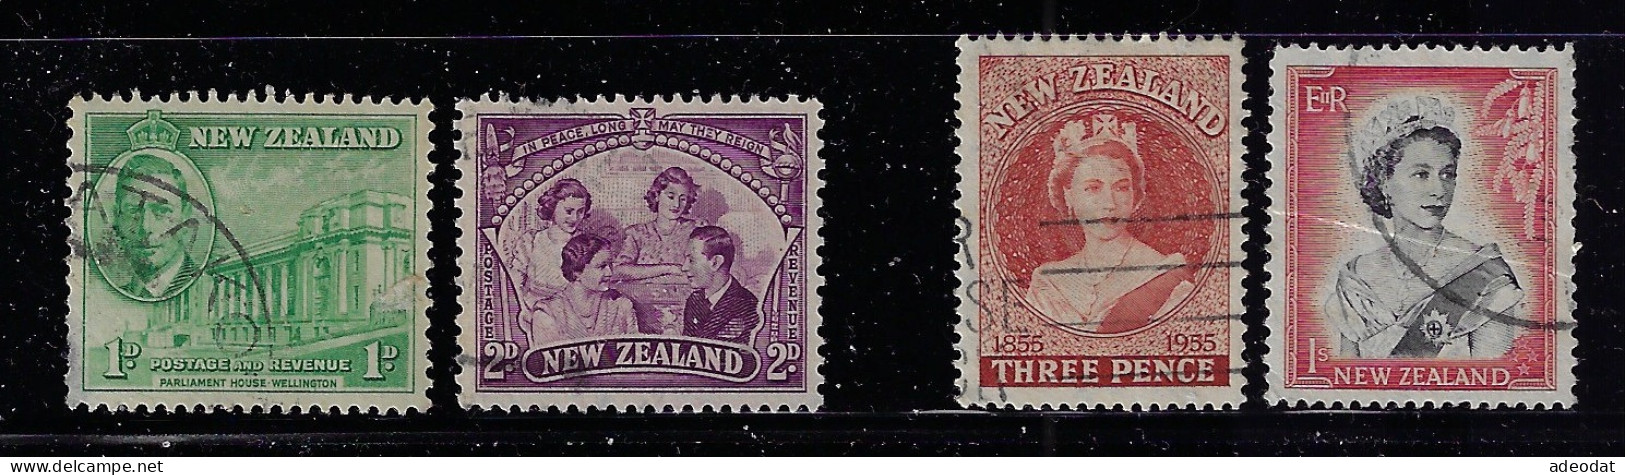 NEW ZEALAND 1946,1955 PARLIAMENT HOUSE,ROYAL FAMILY,THE QUEEN  SCOTT #248,250,297,303 USED - Gebraucht